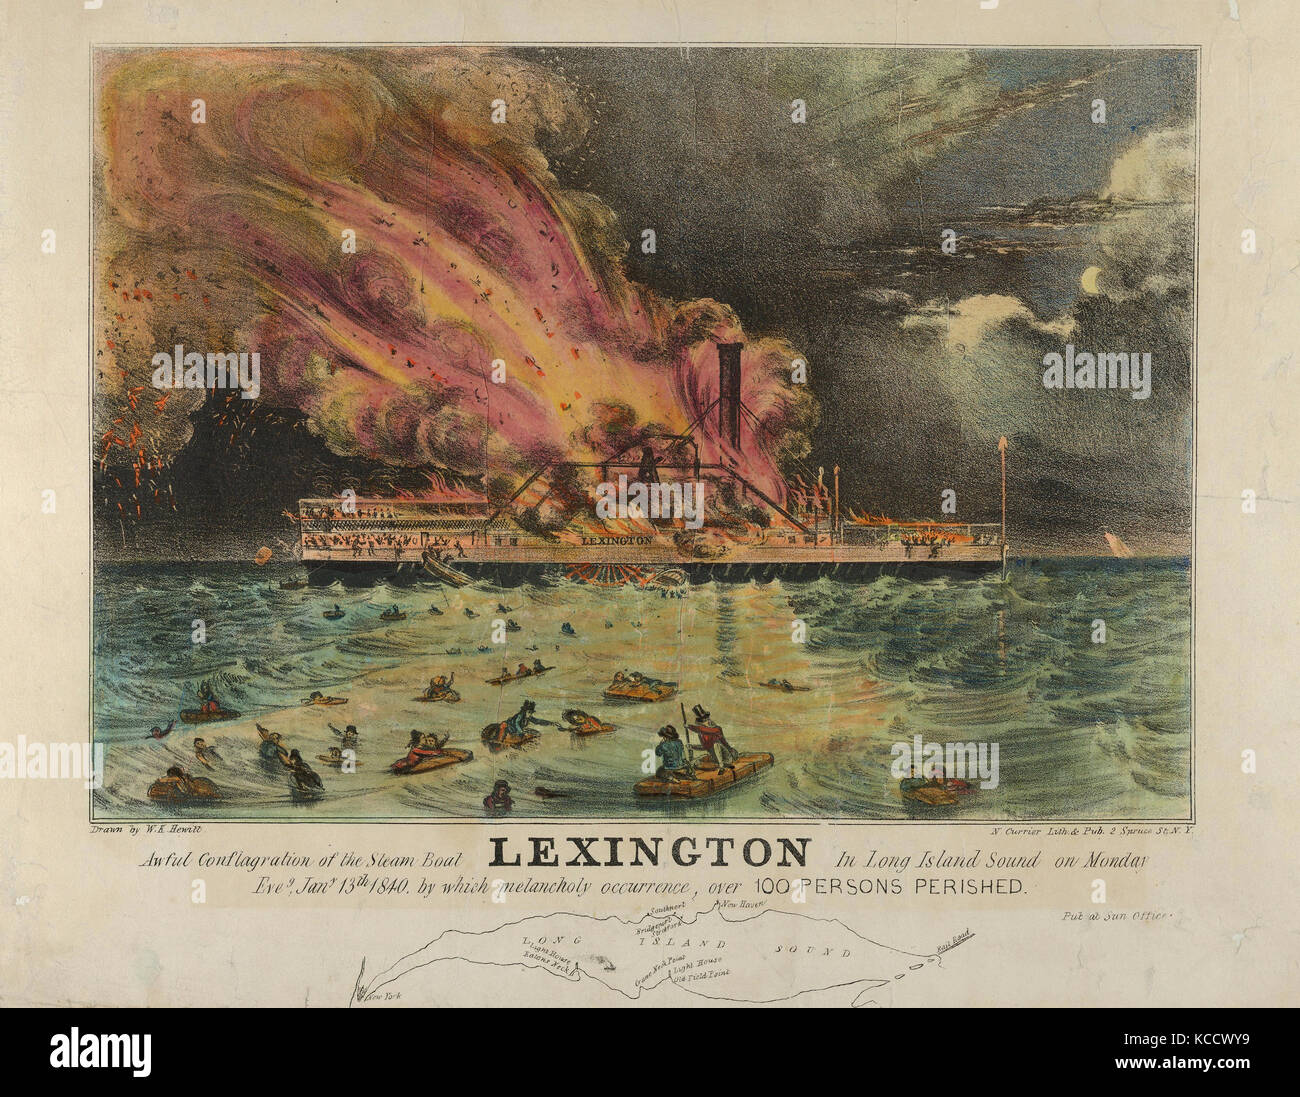 Drawings and Prints, Print, Awful Conflagration of the Steam Boat Lexington in Long Island Sound on Monday Eve, January 13th Stock Photo